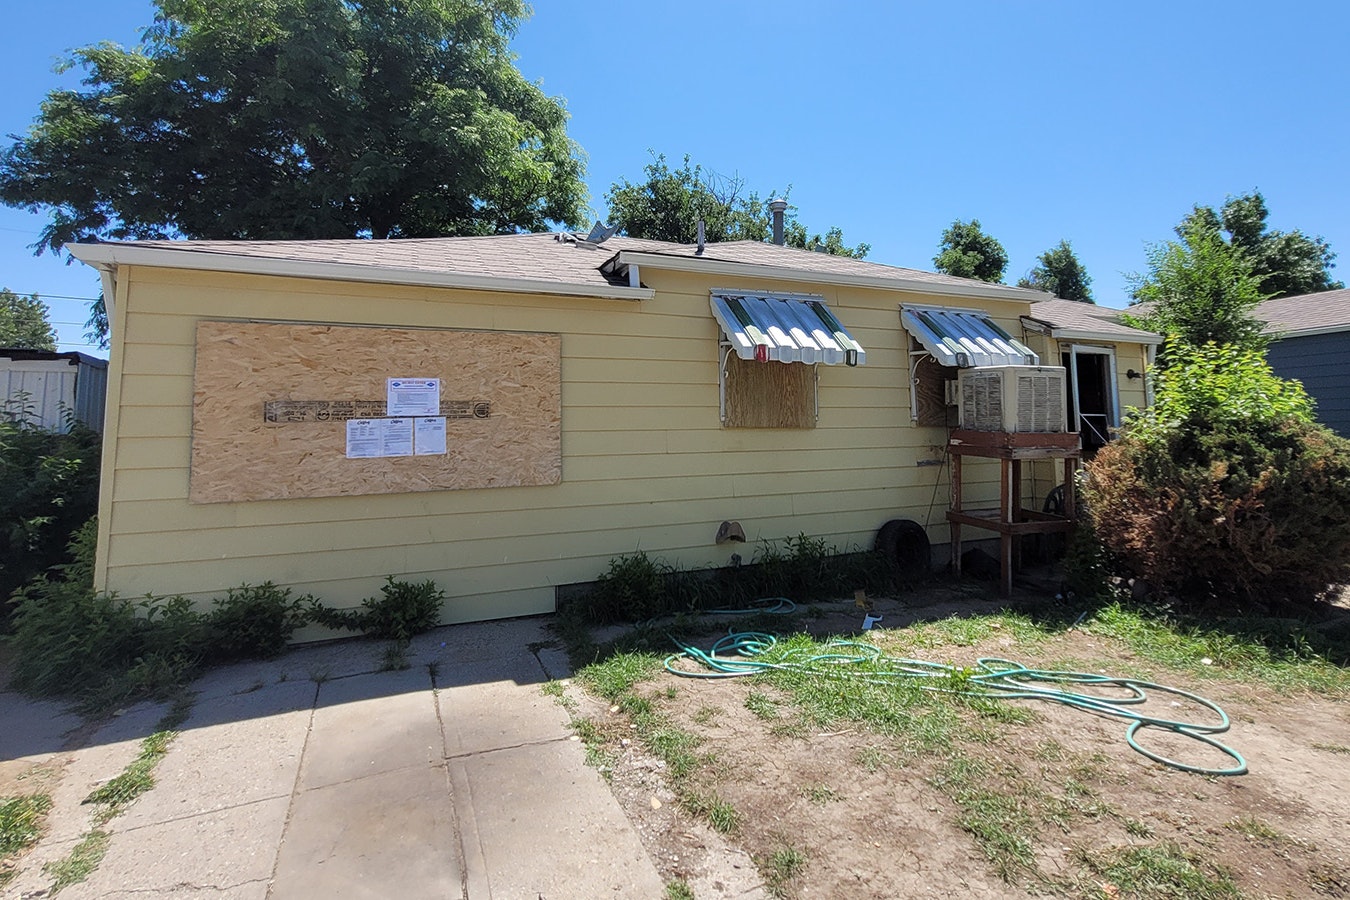 The City of Casper designated this house in the 1500 block of Westridge Place a “dangerous” building after drug activity and squatters took it over.